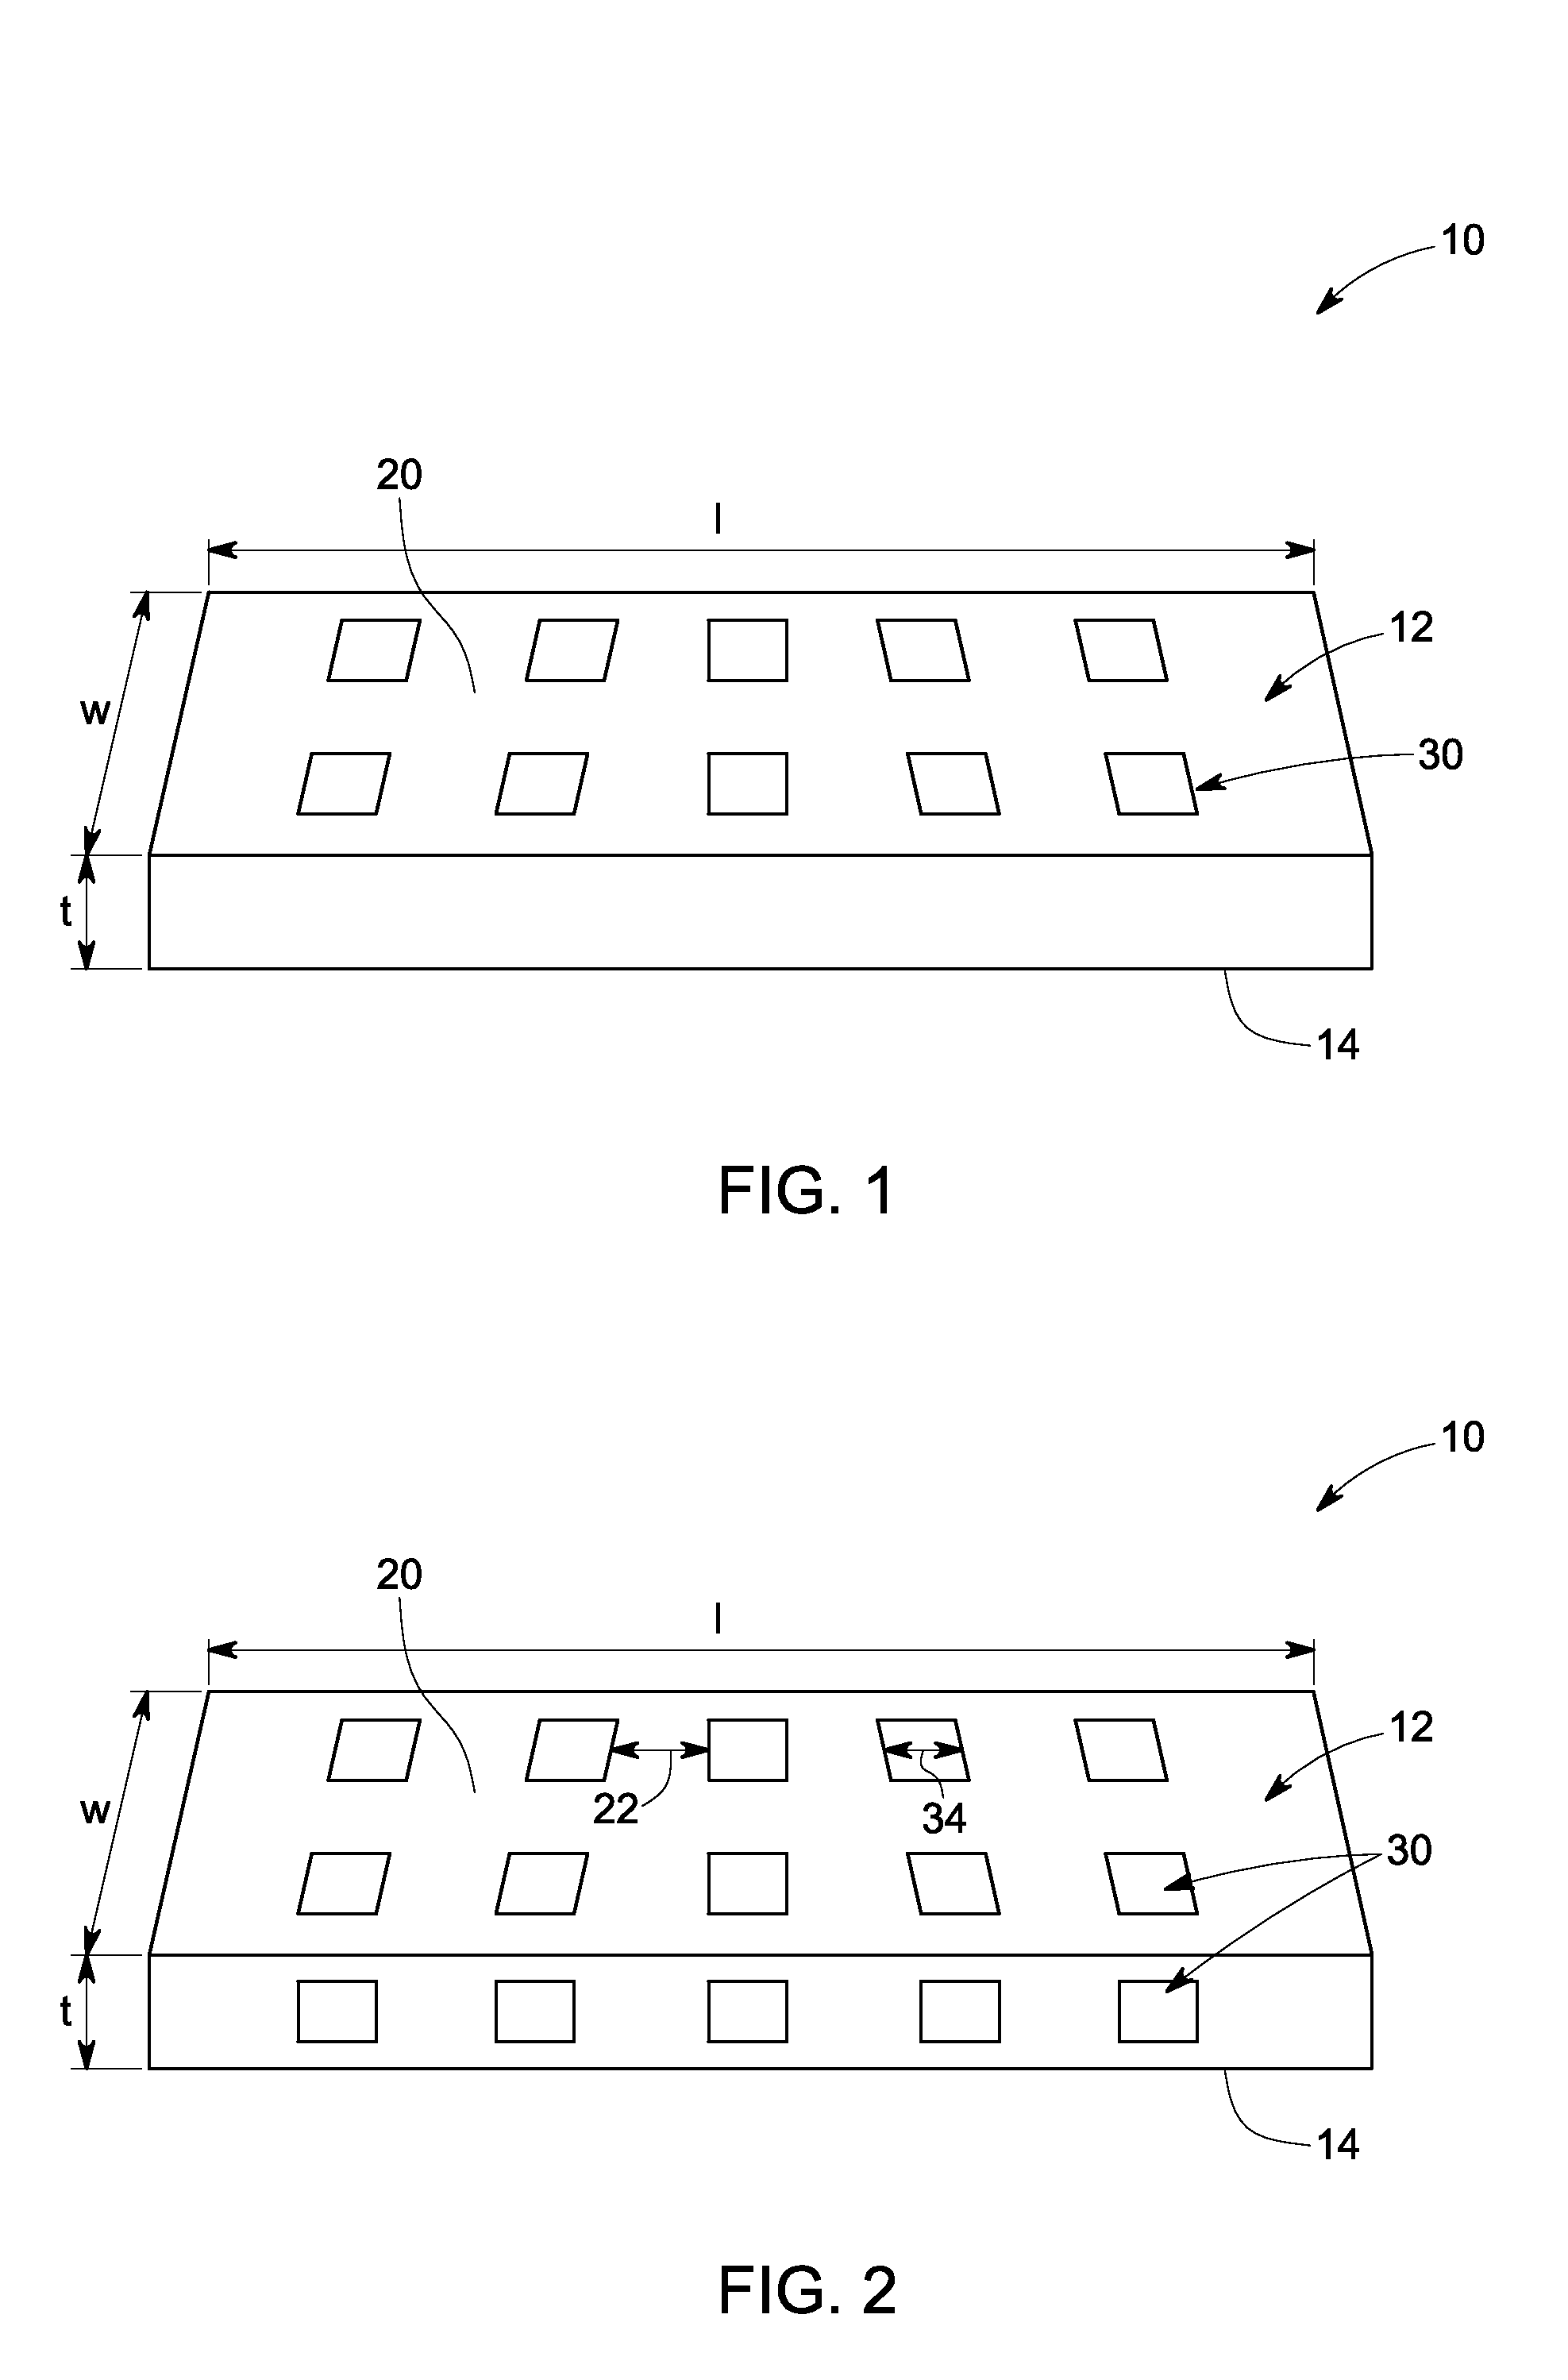 Dual phase magnetic material component and method of forming